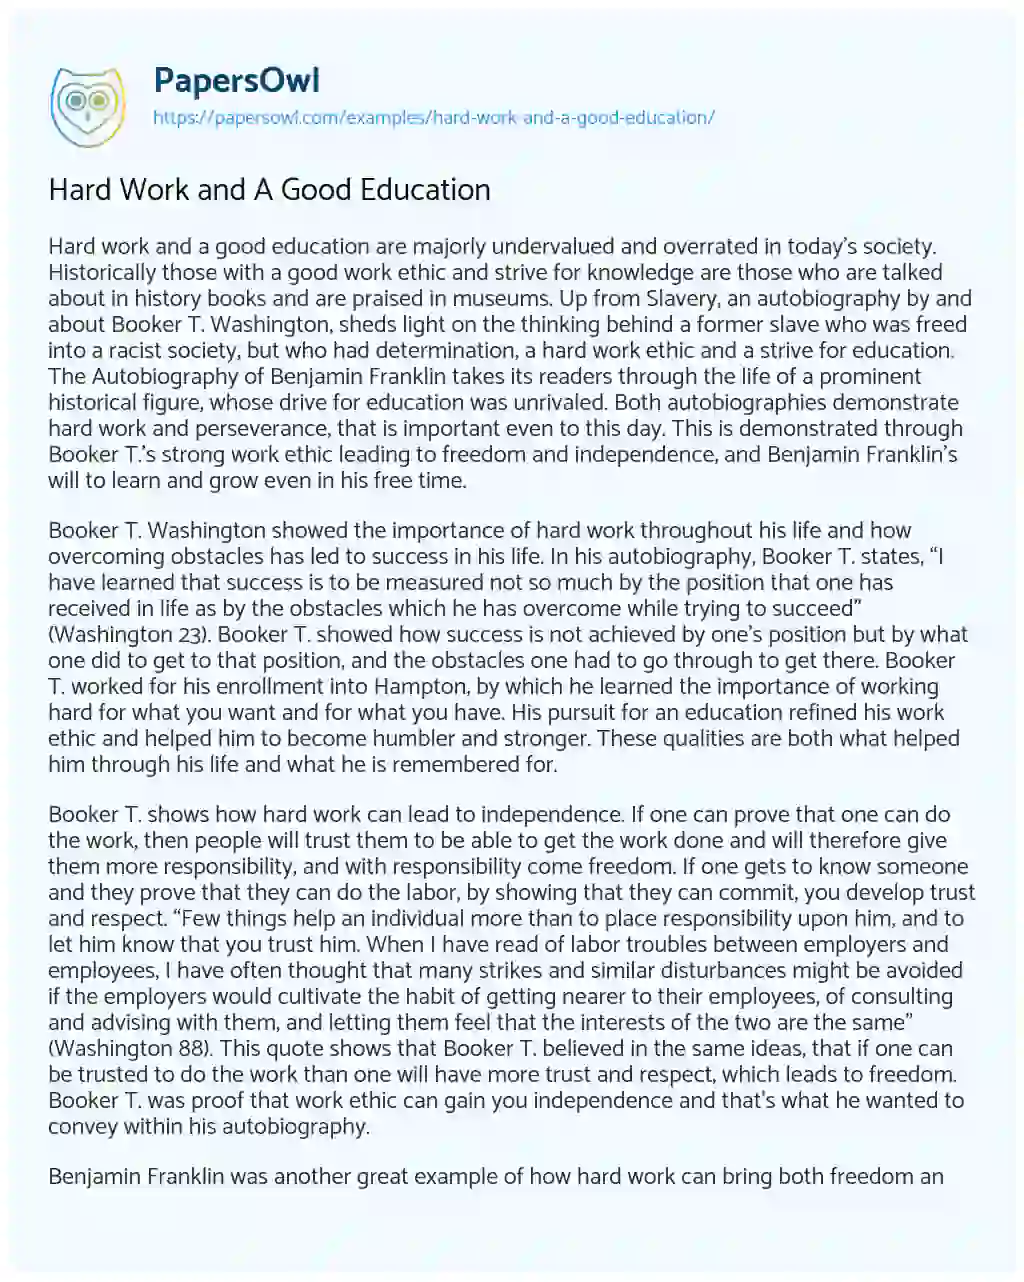 Hard Work and a Good Education essay